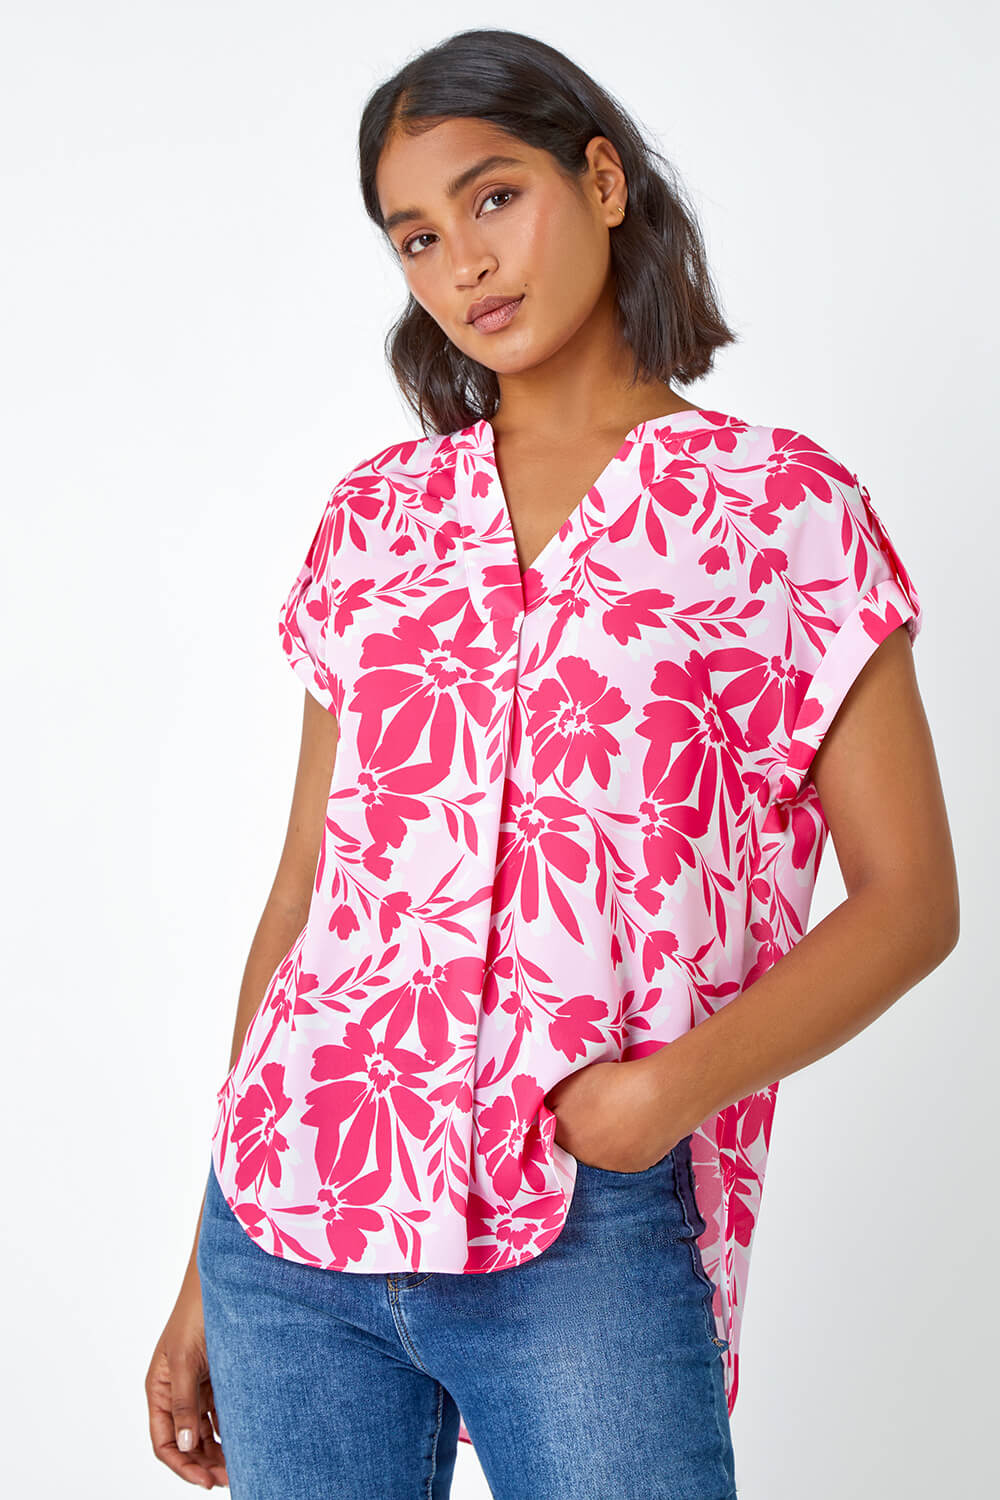 PINK Floral Print Pleat Front Top, Image 4 of 5